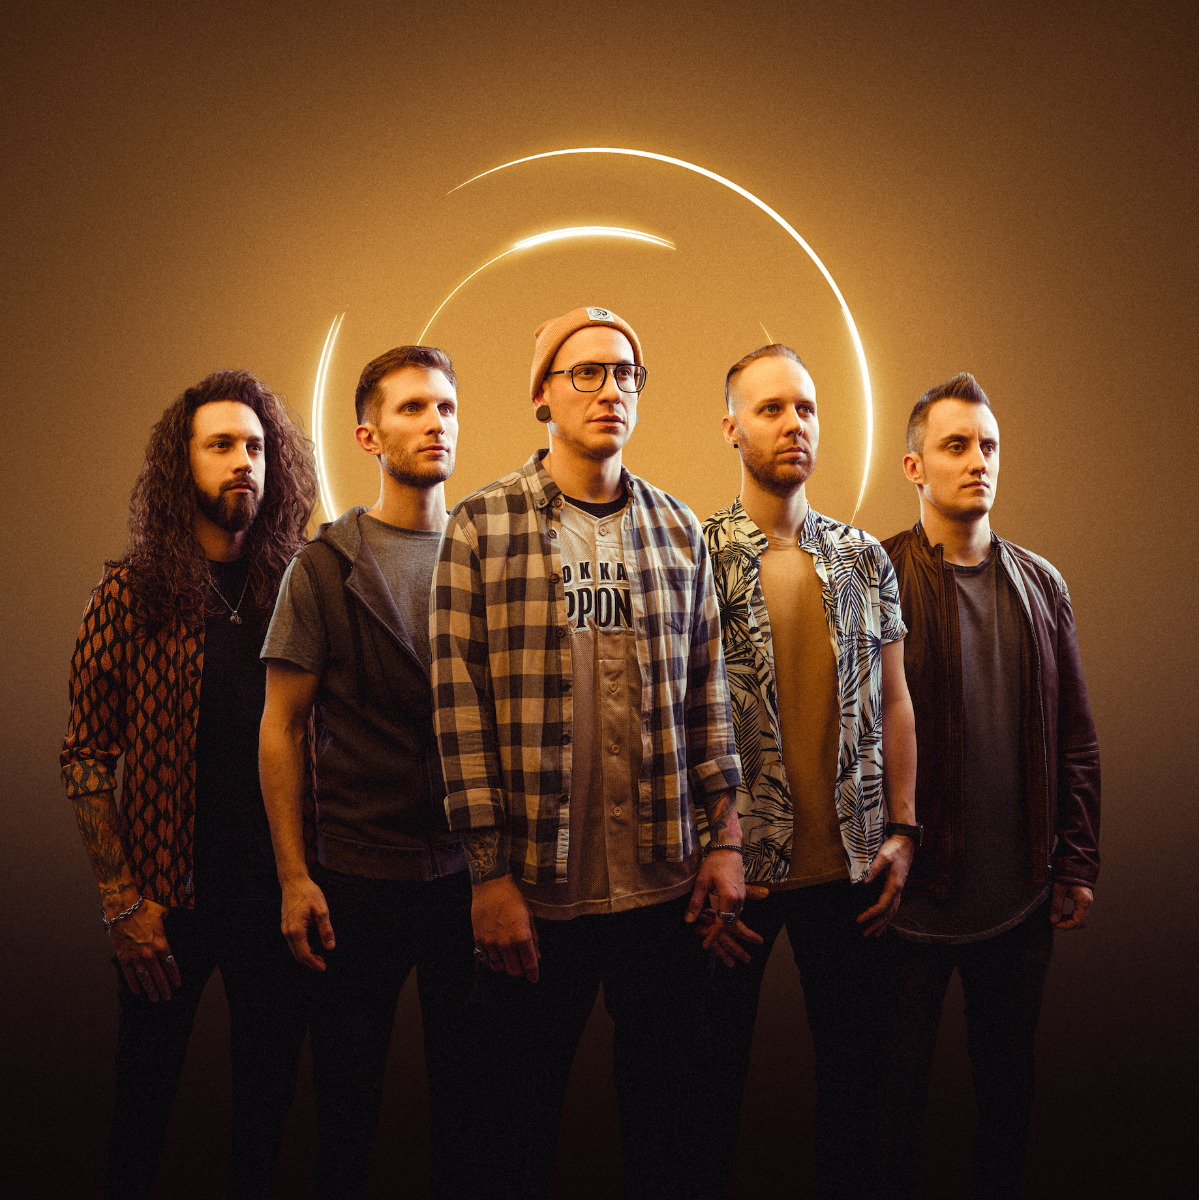 Five men from Dreamshade standing in a group, framed by a neon circular light in the background, looking intently at the camera.